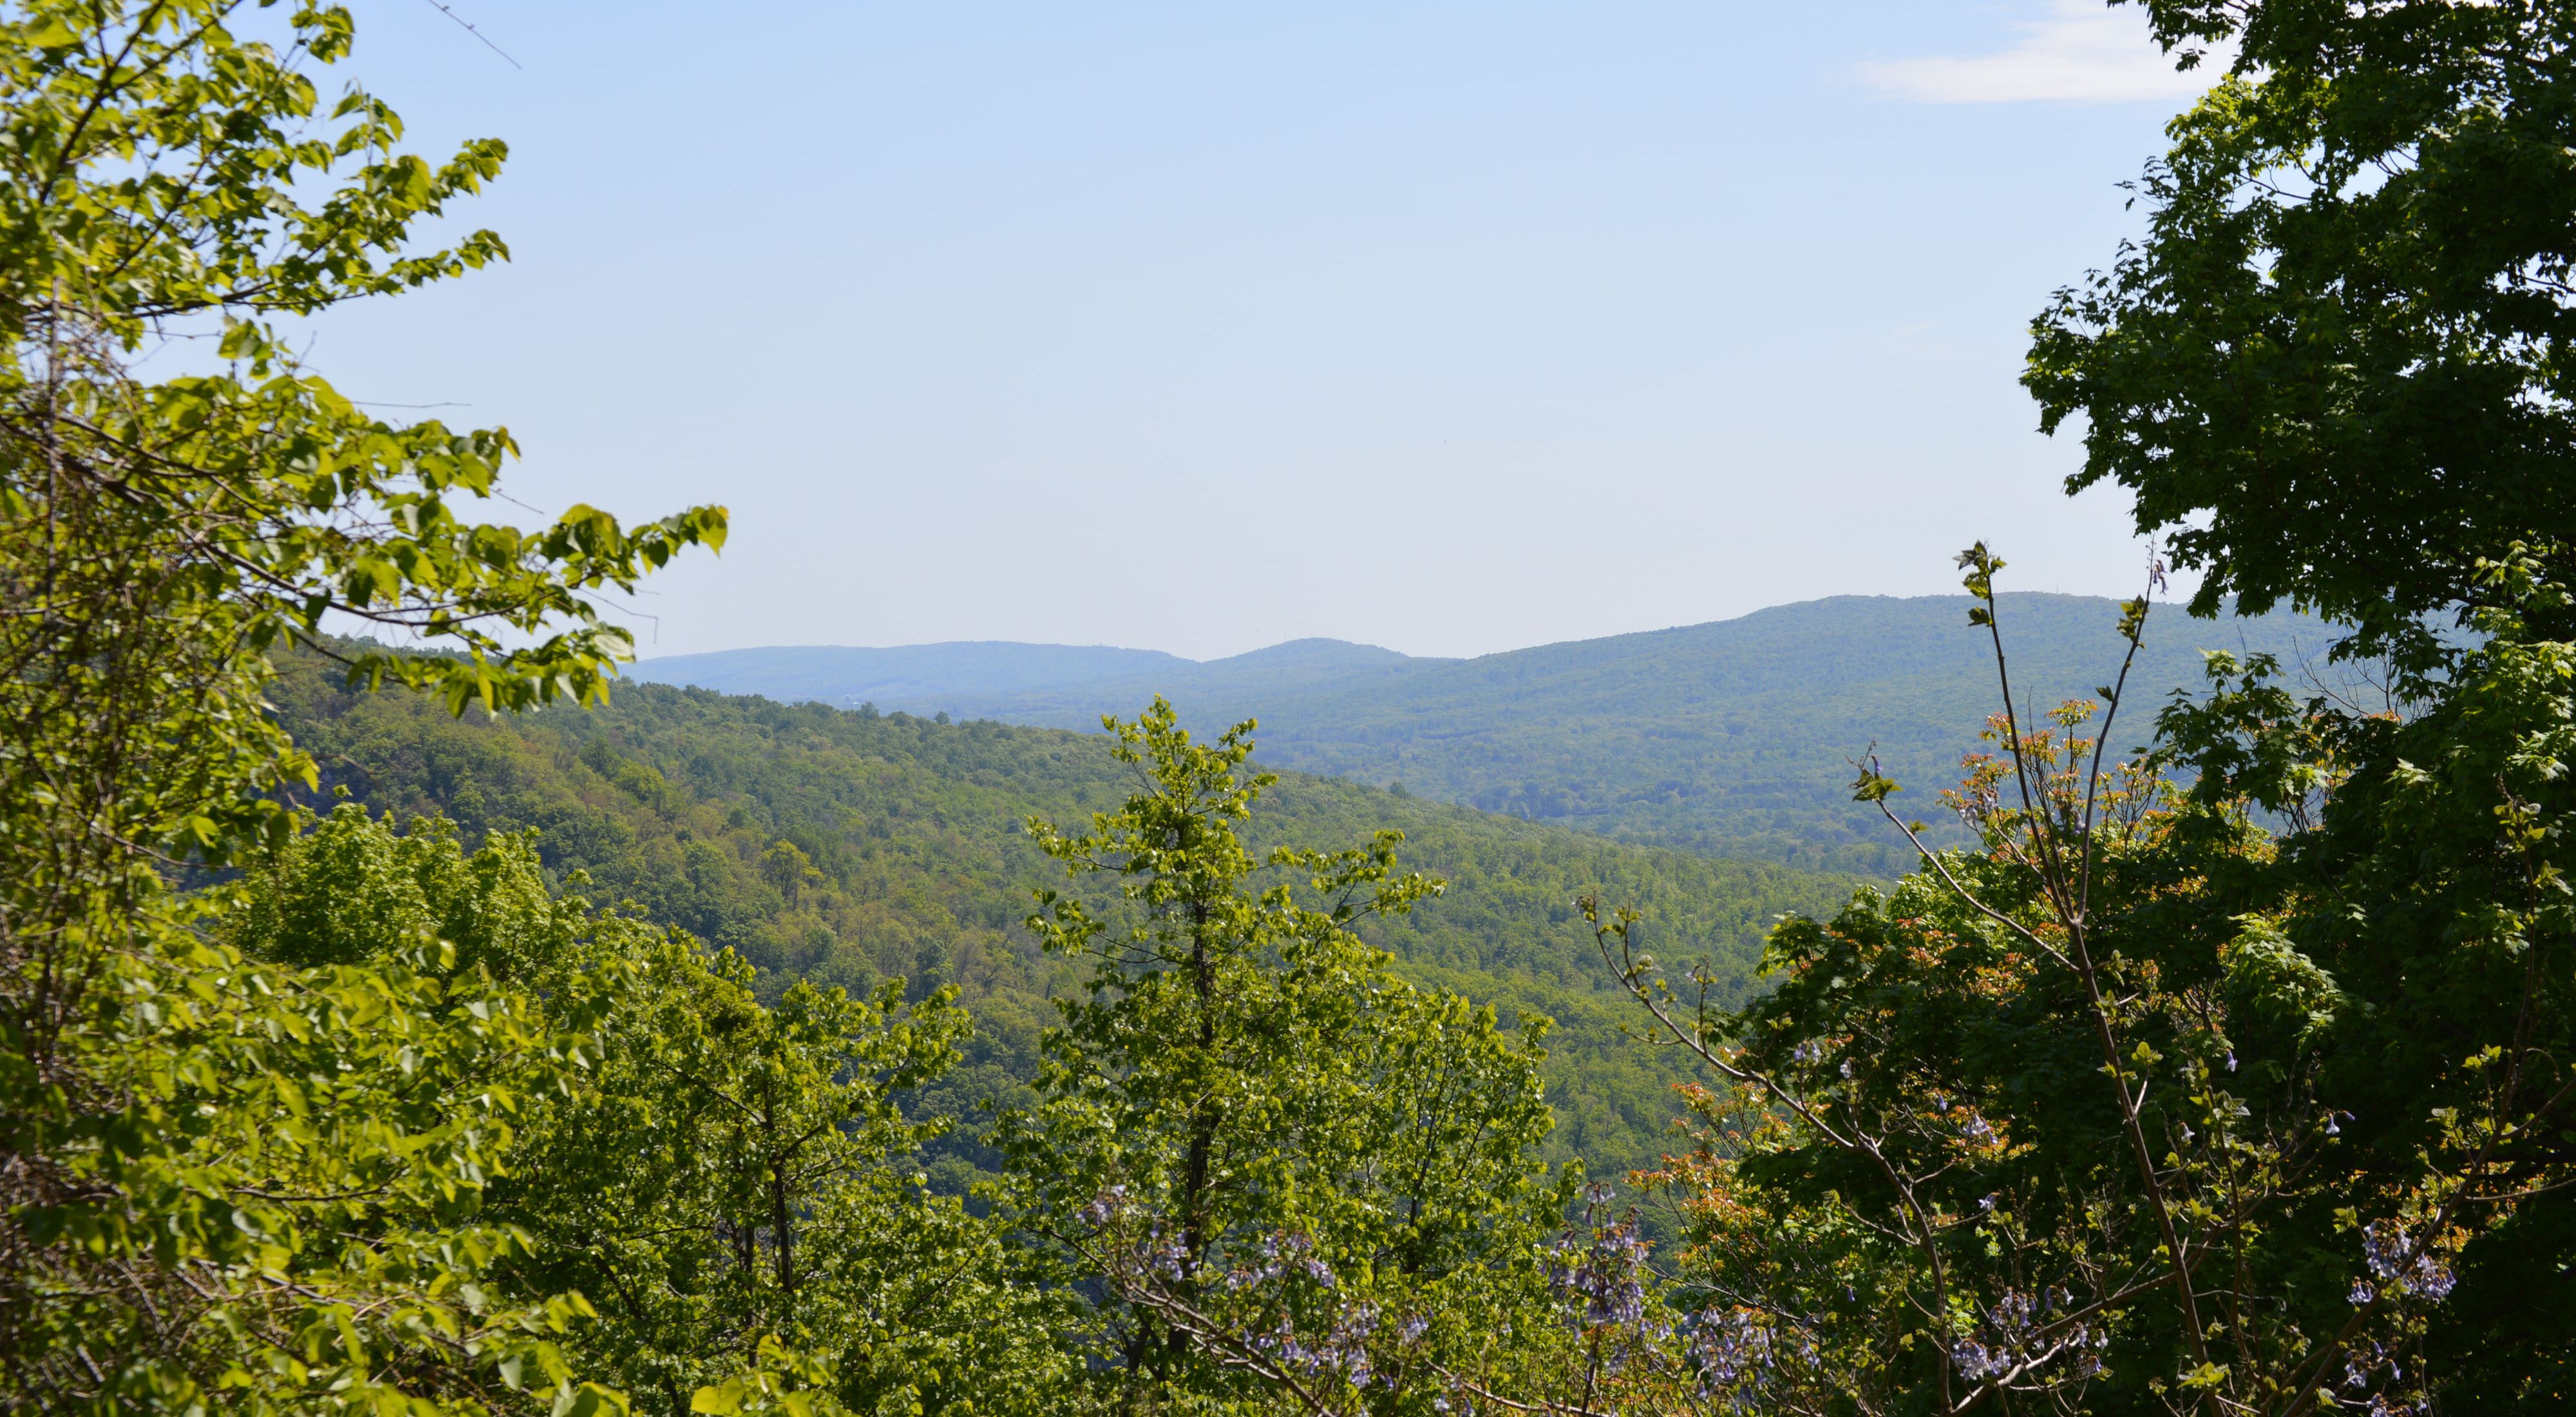 A view from a vista with several lush green trees and mountain ranges in the distance.